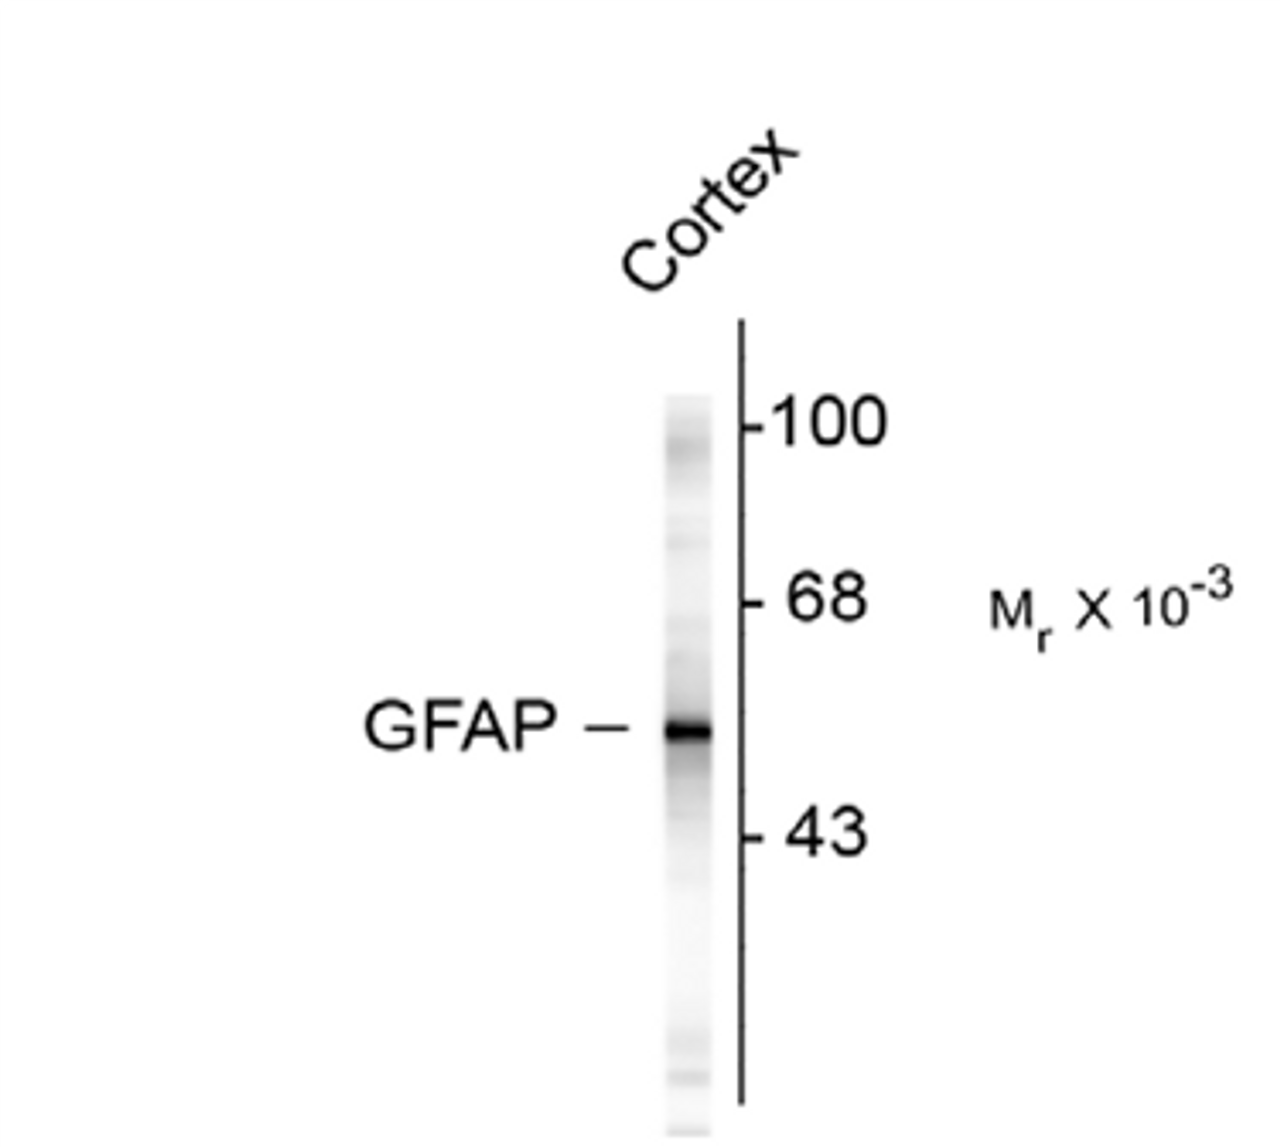 Western blot of rat cortex lysate showing specific immunolabeling of the ~50k GFAP protein.